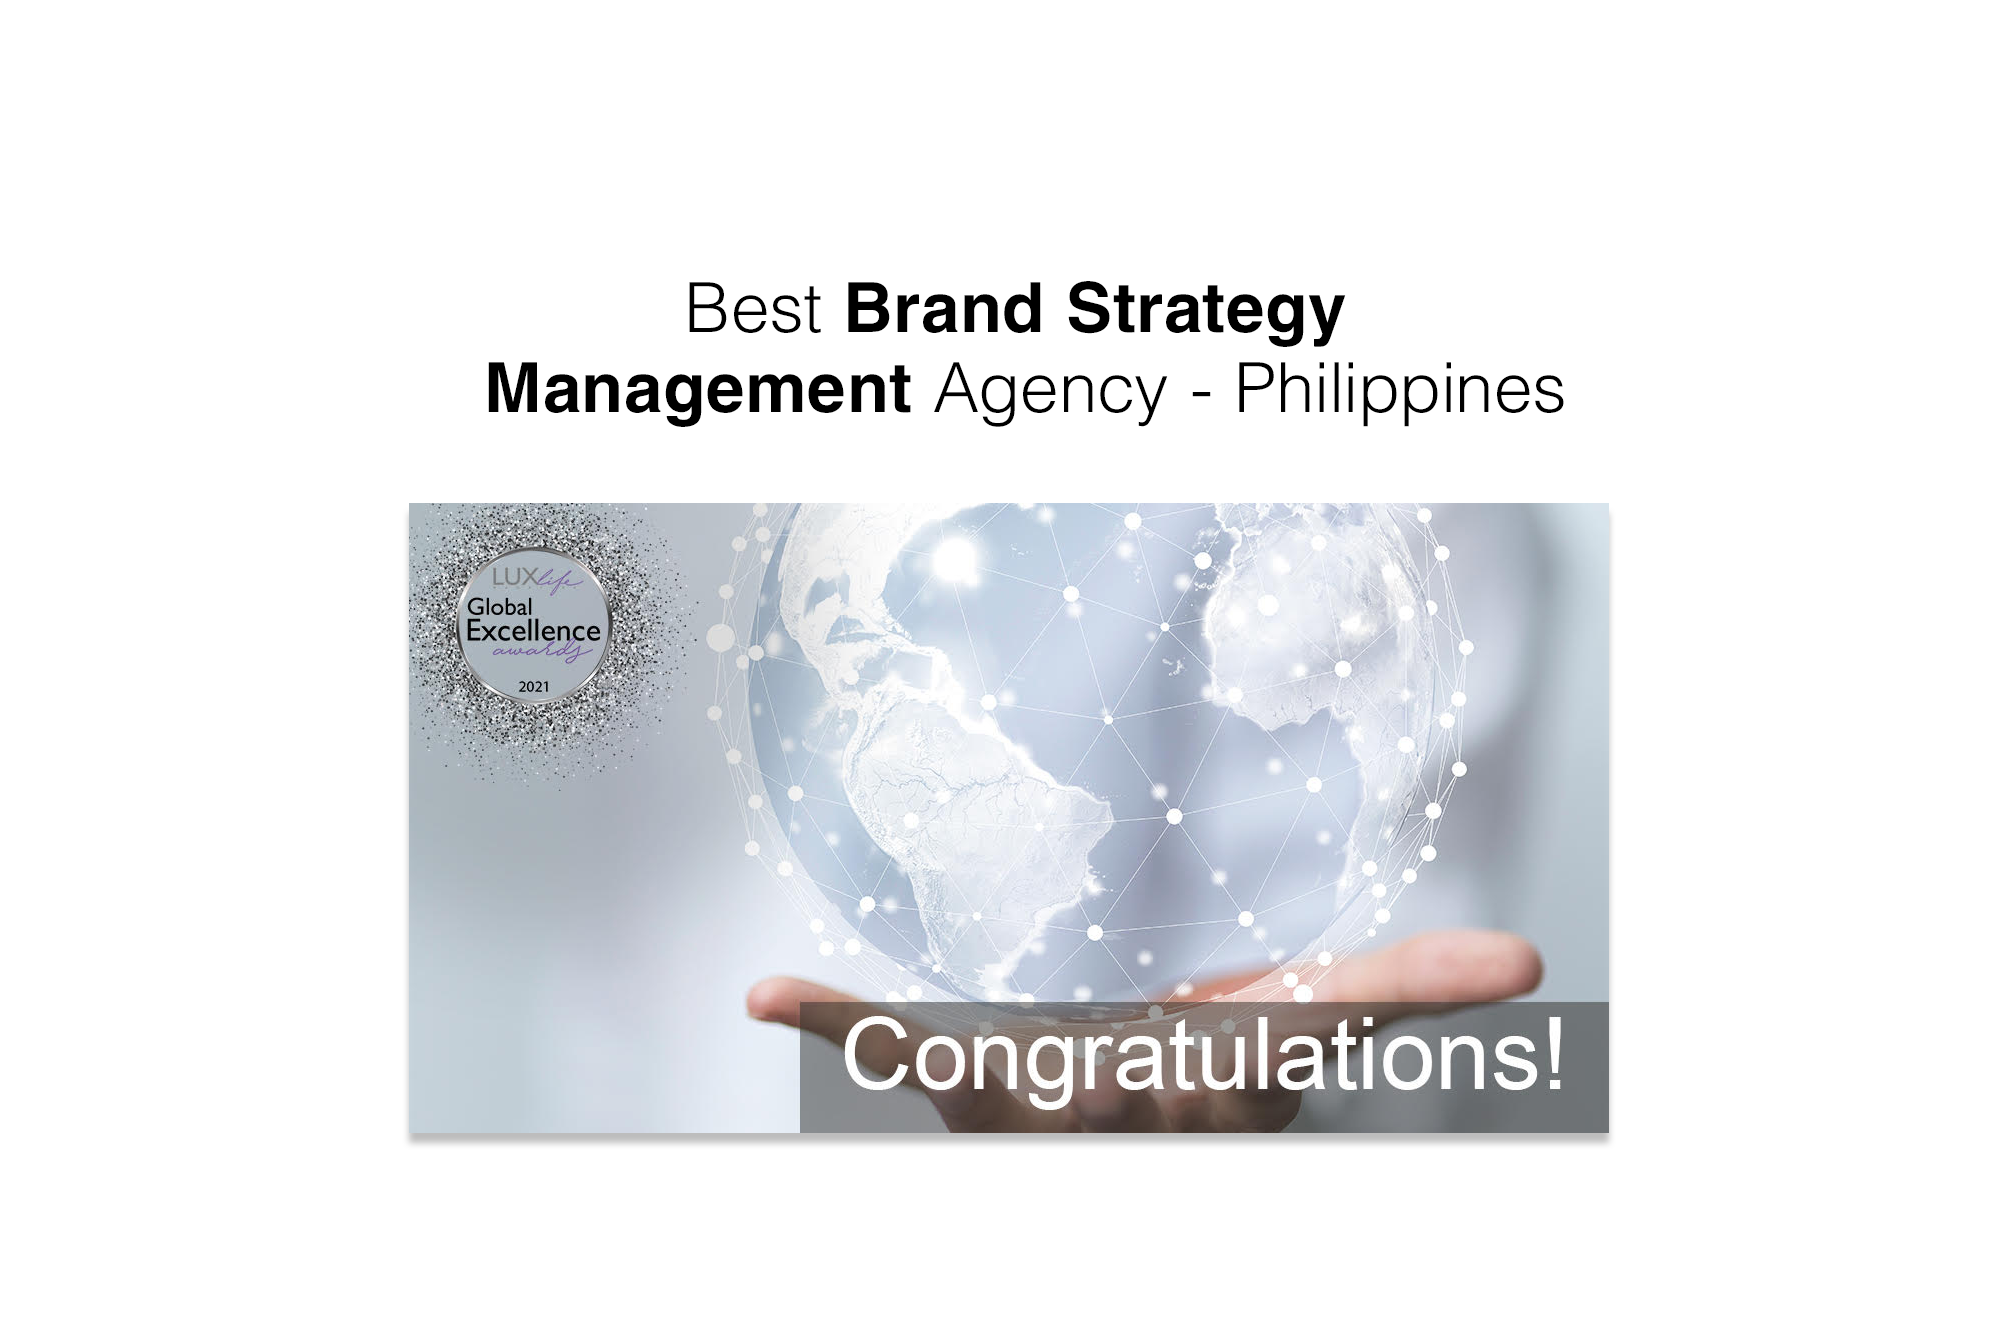  Tribox Design has been named one of the Best Brand Strategy Management in the Philippines